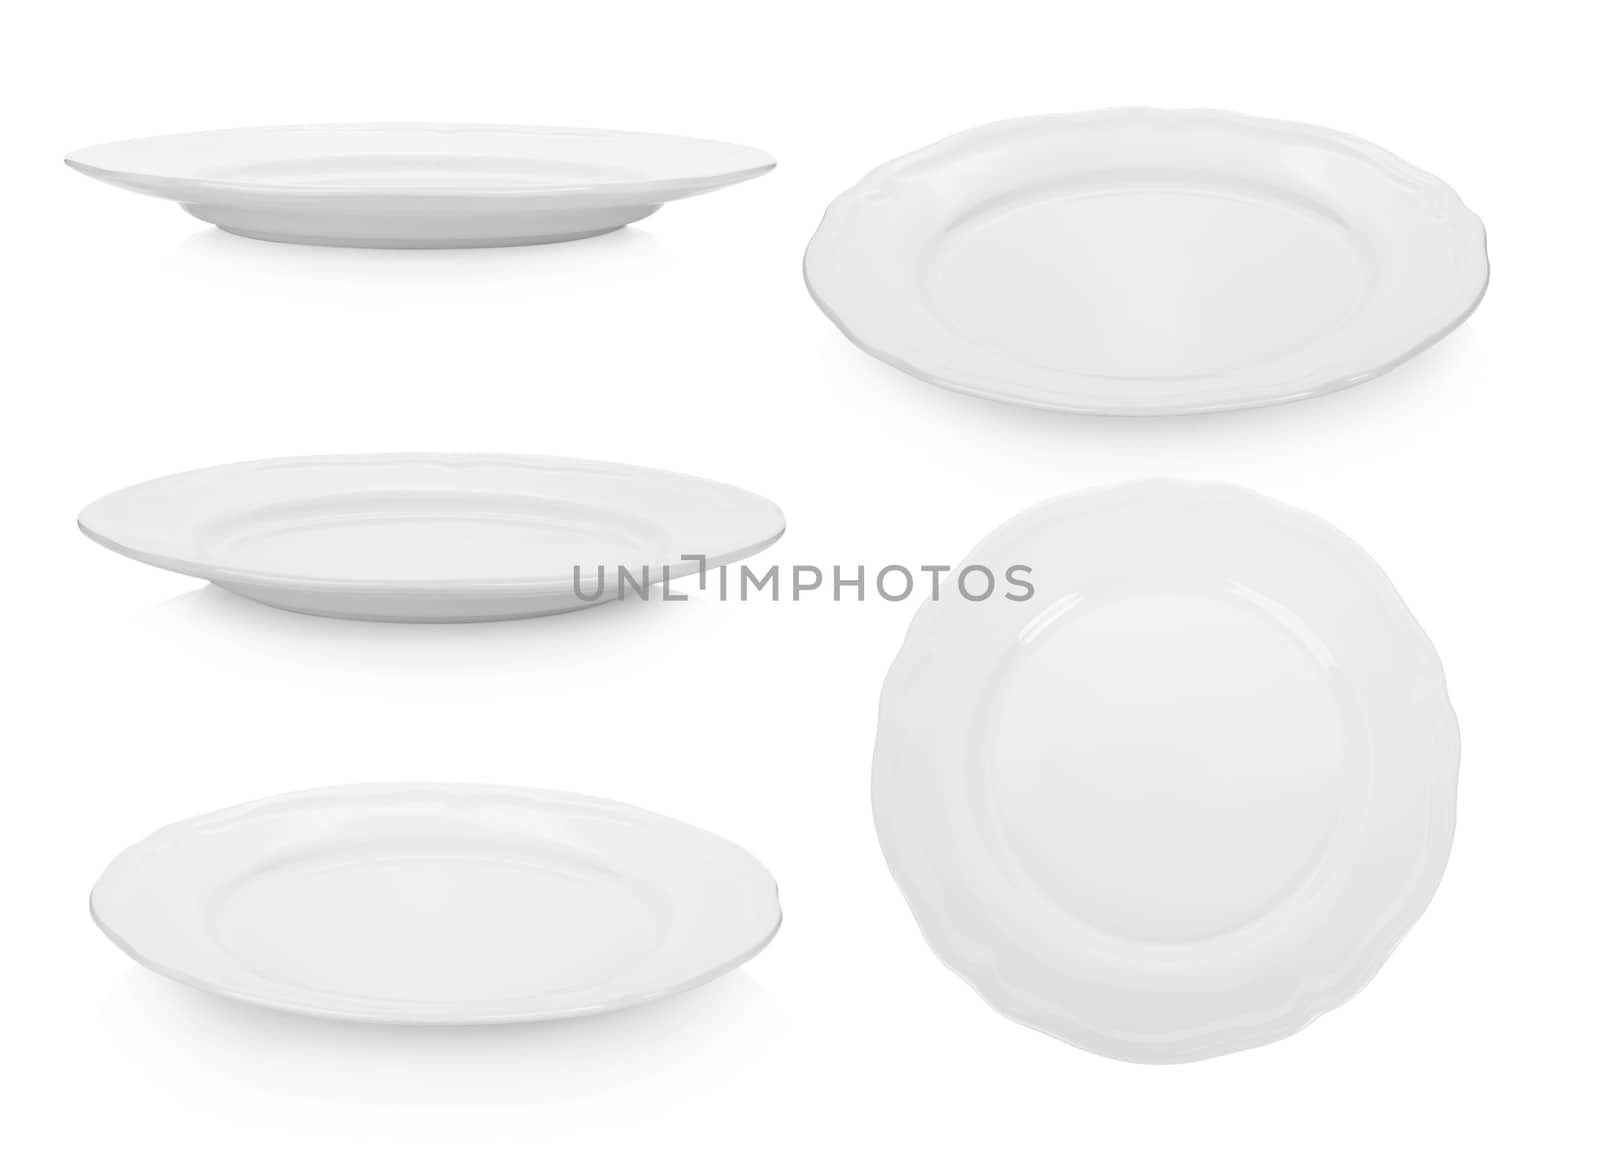 collection of white plate on white background